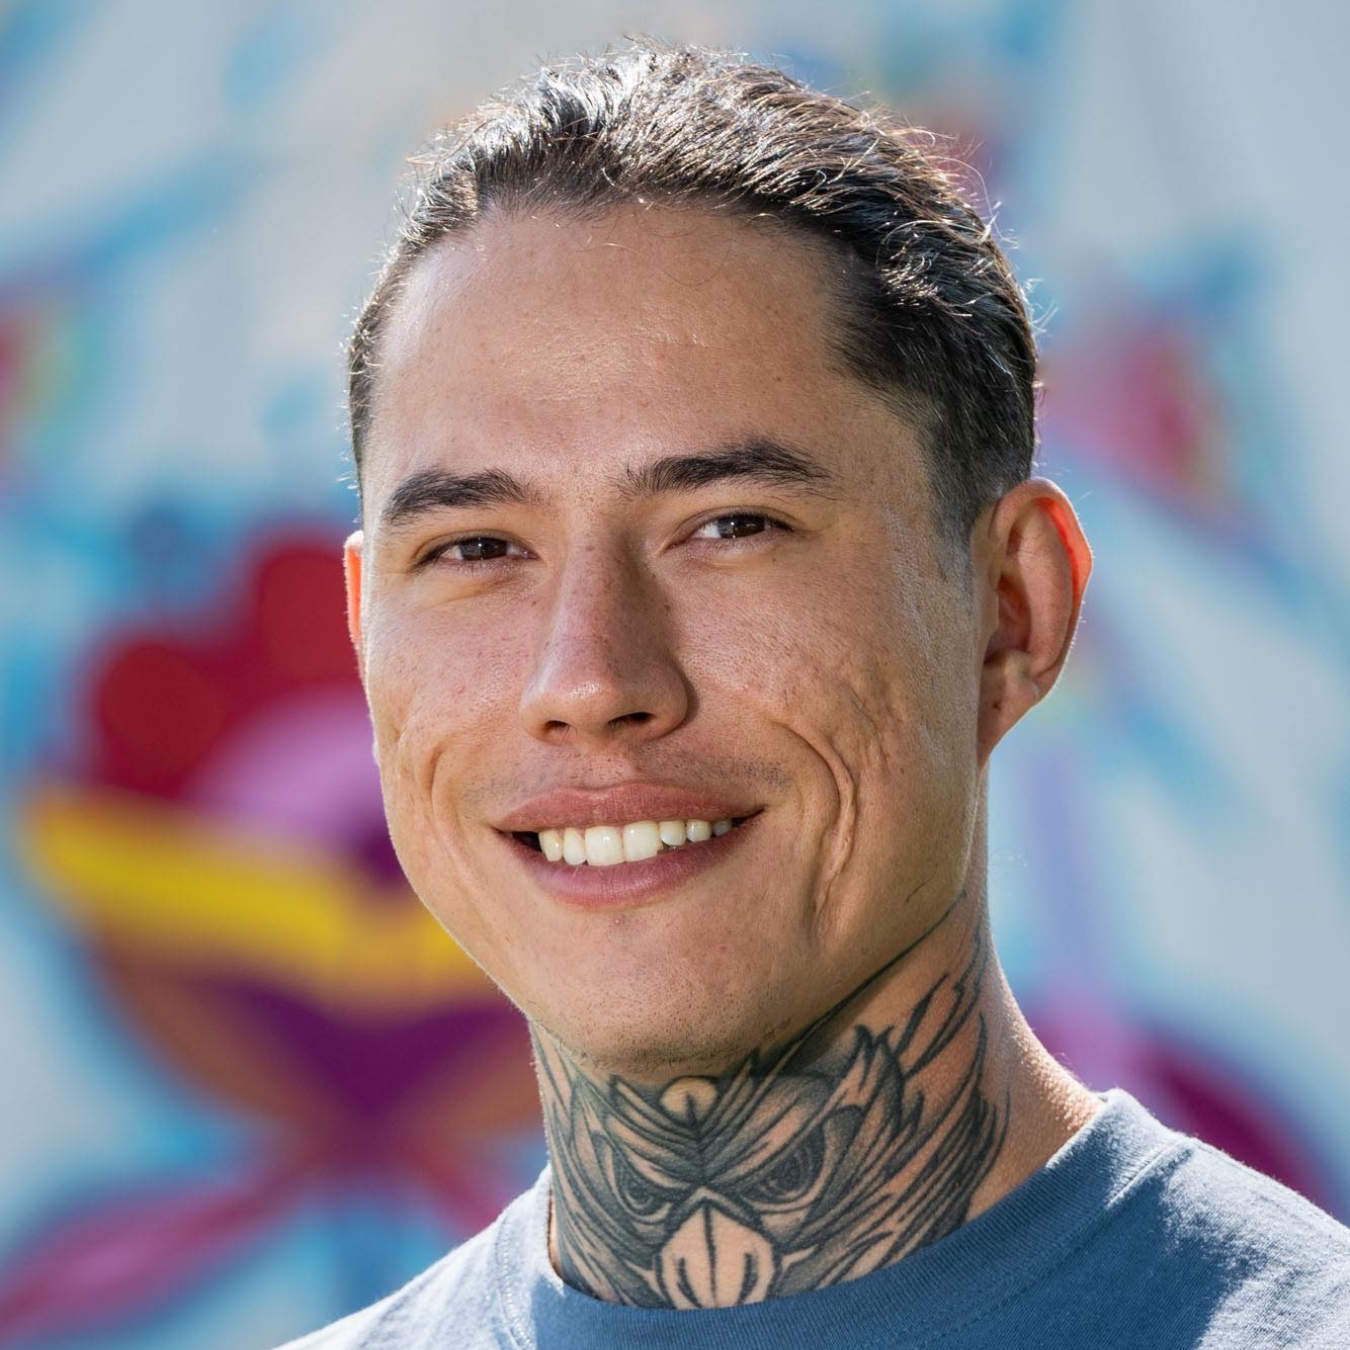 Headshot of a person with medium-light skintone and a neck tattoo wearing a t-shirt in front of a colorful mural.